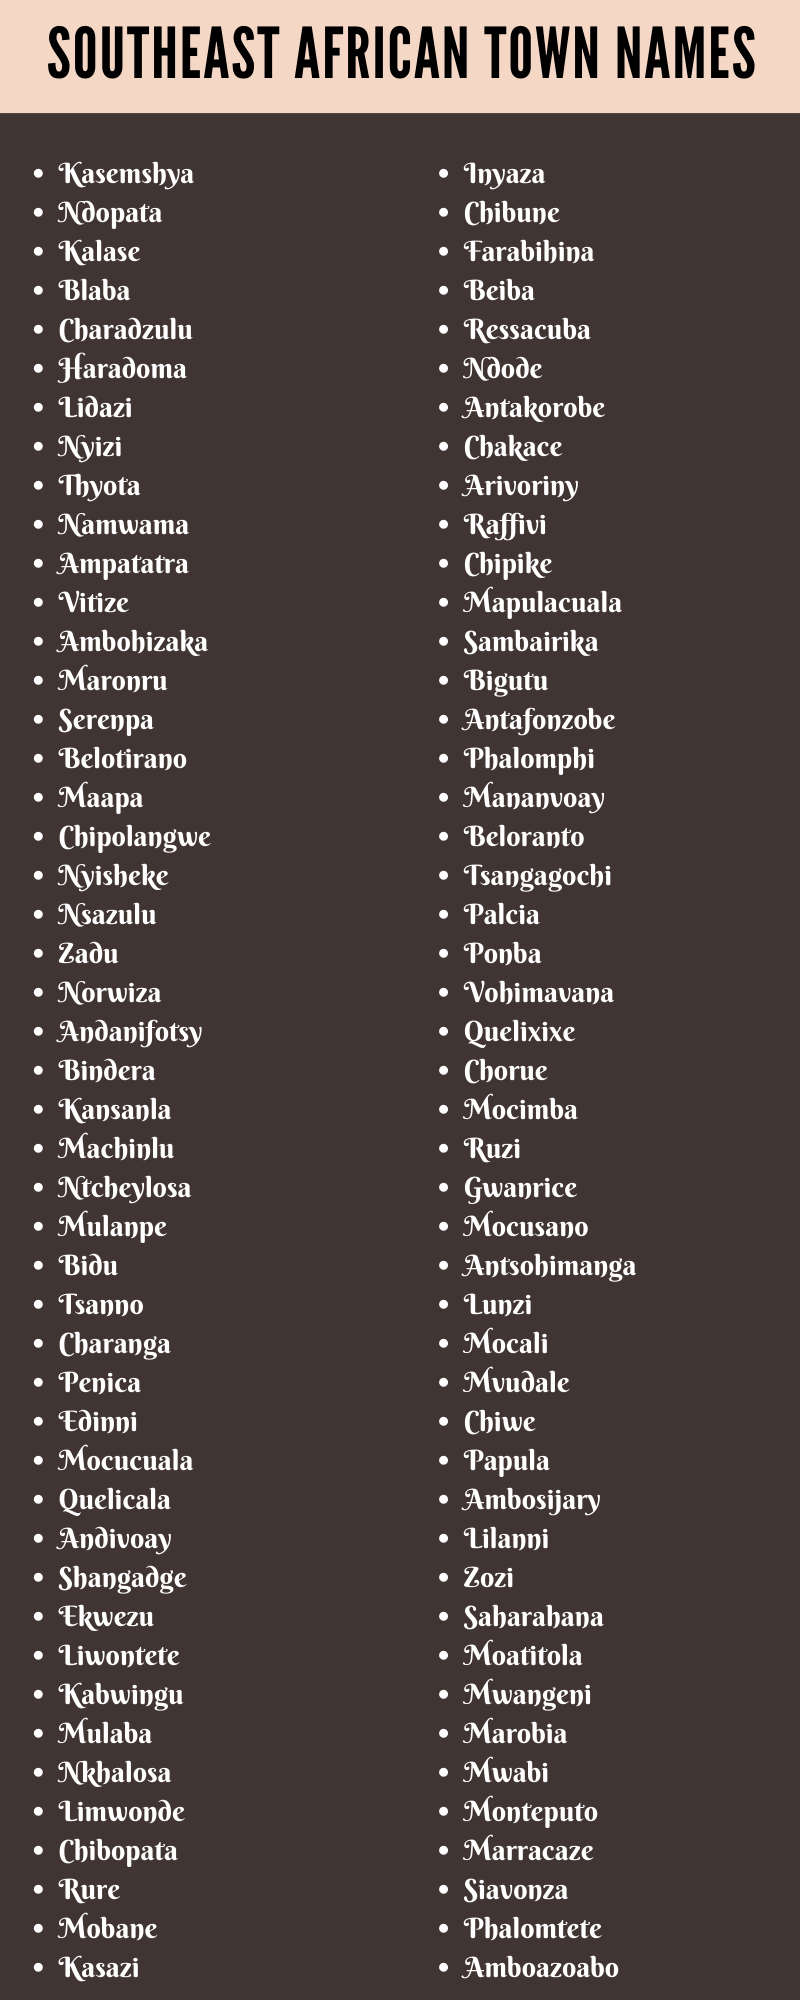 Southeast African Town Names